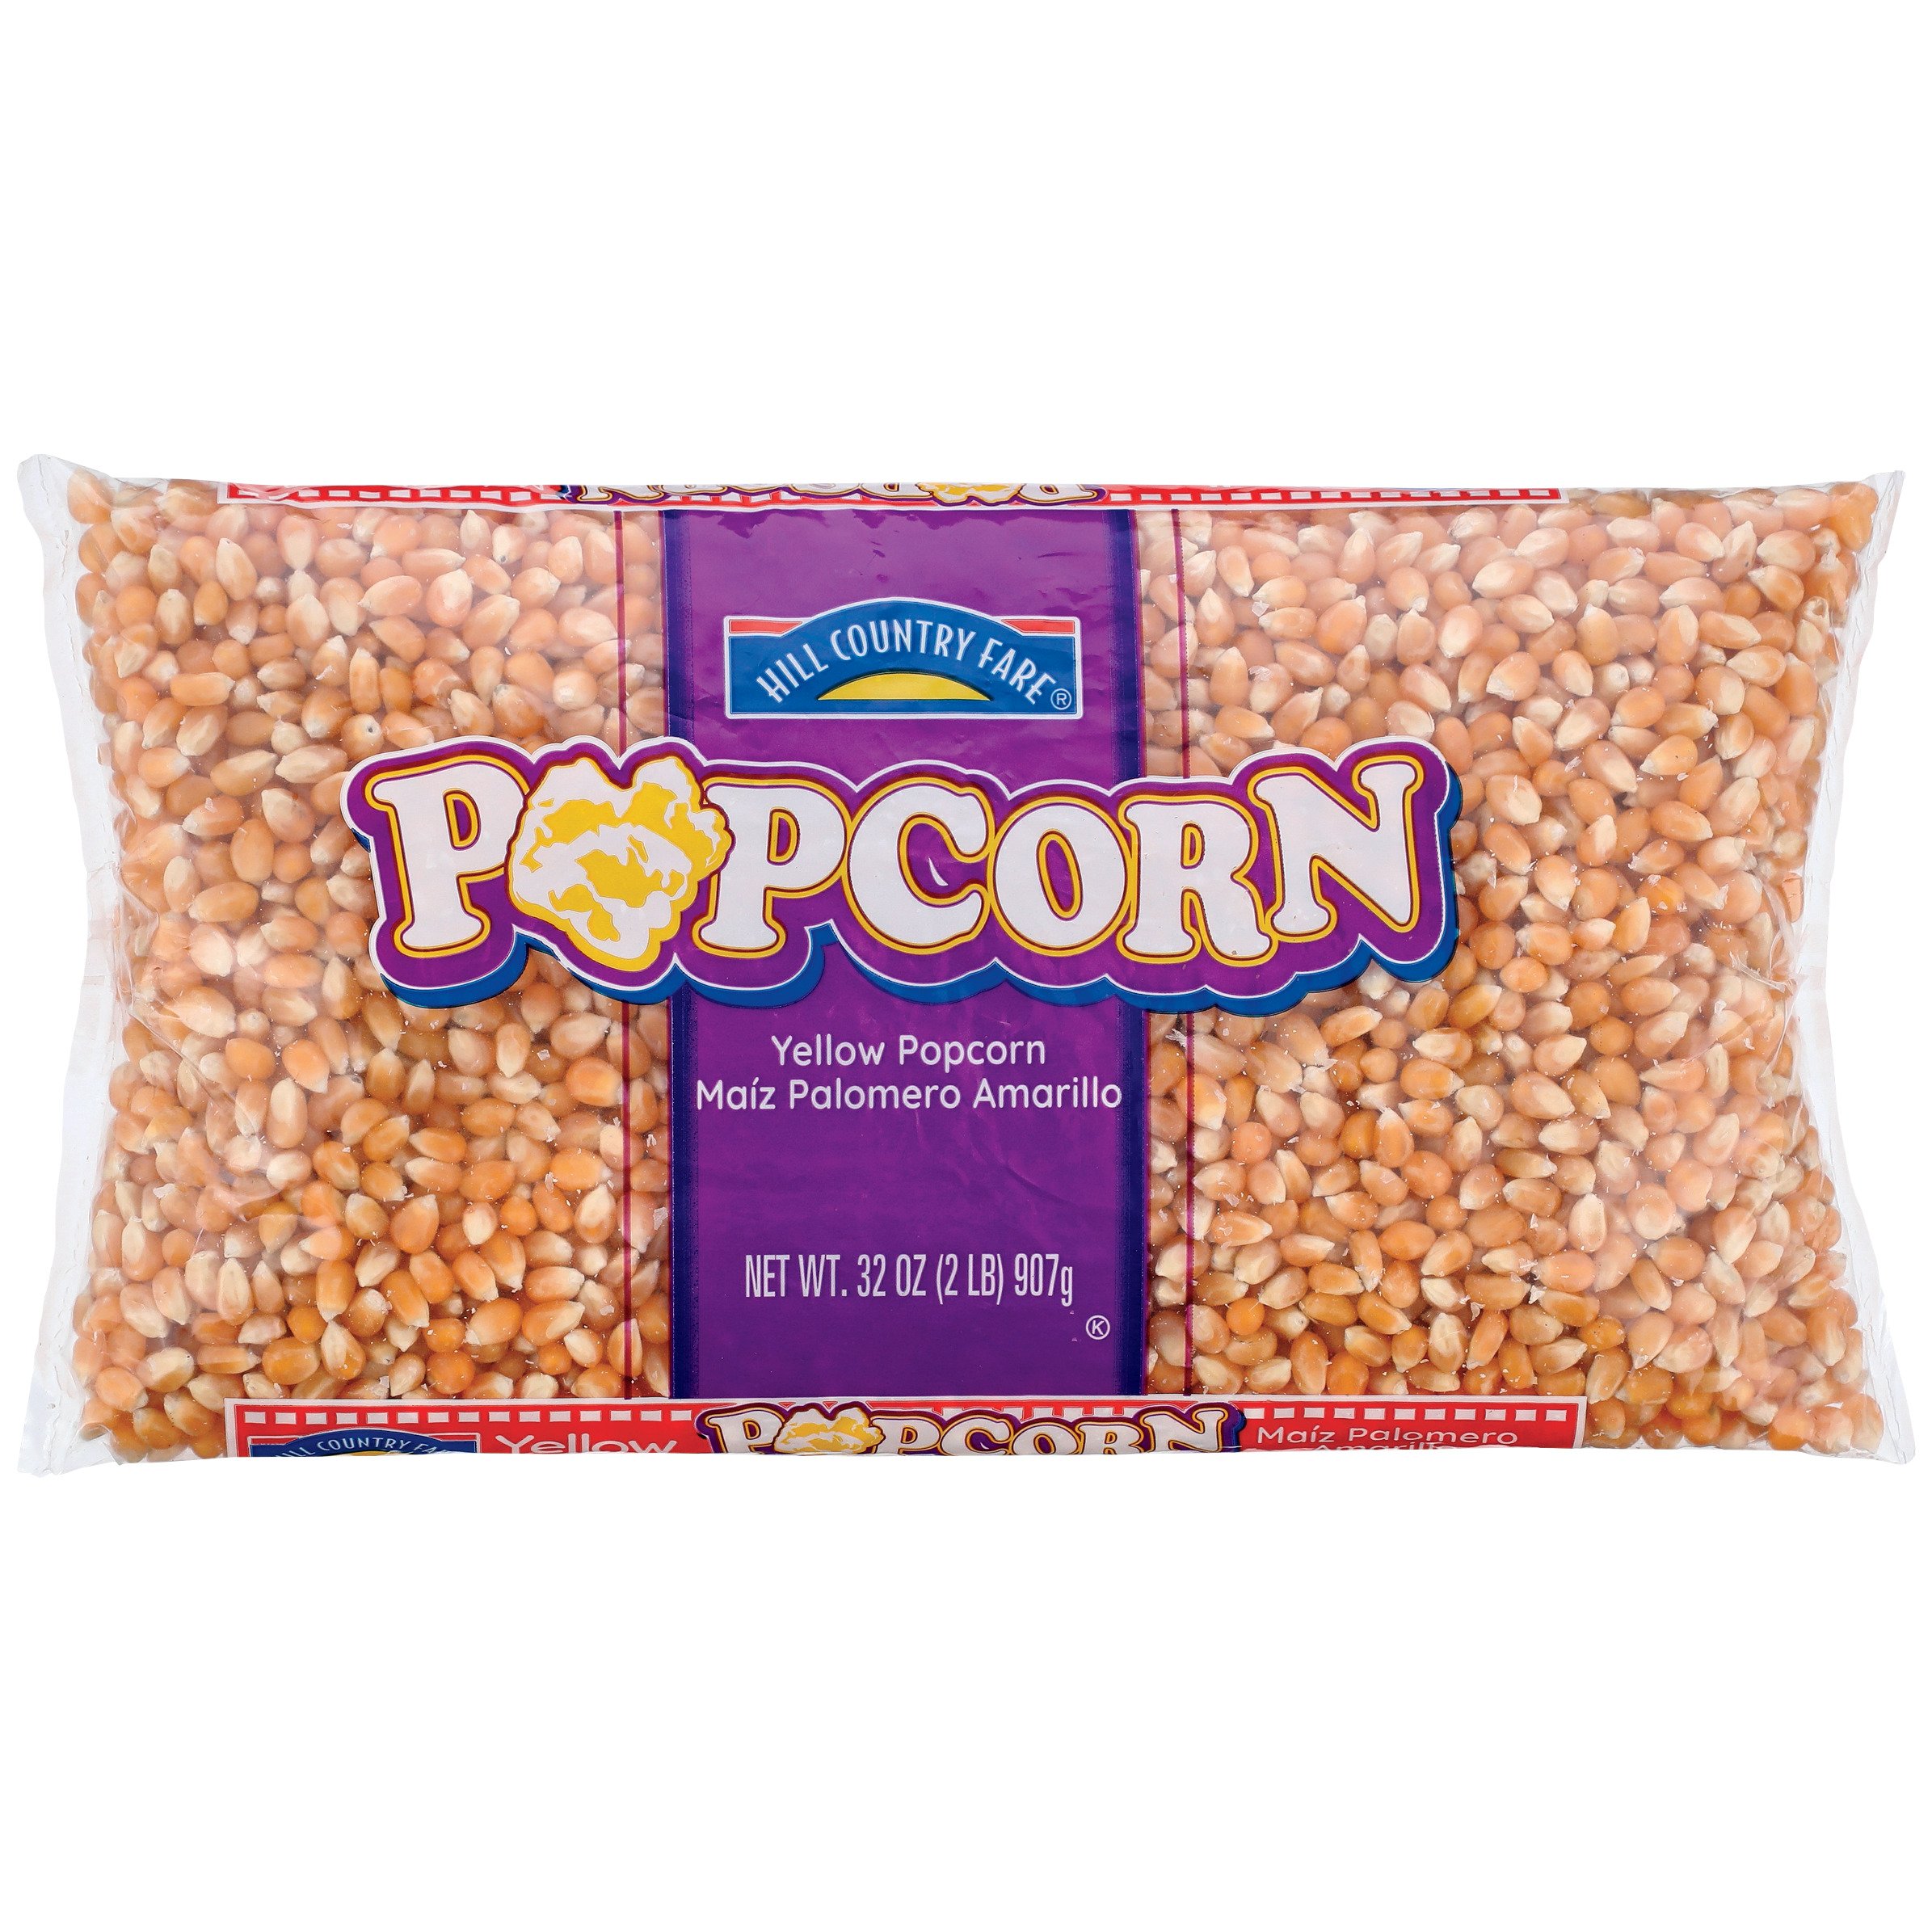 Hill Country Fare Yellow Popcorn Shop at